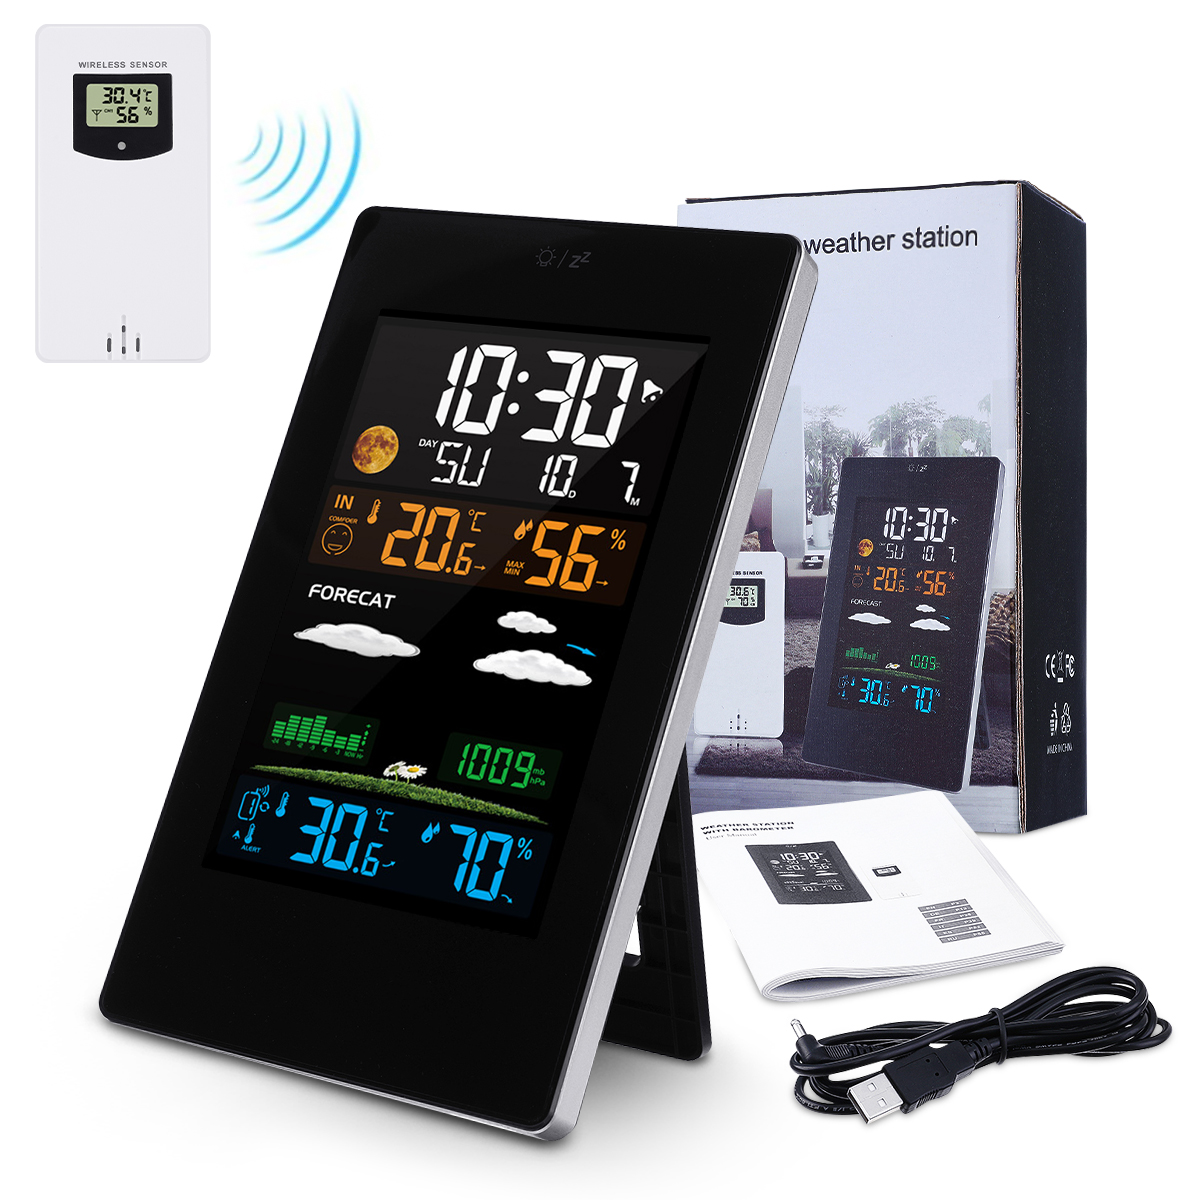 JOYXEON-Wireless-Weather-Station-with-Outdoor-Sensor-Digital-Hygrometer-Thermometer-and-Humidity-Mon-1581122-6